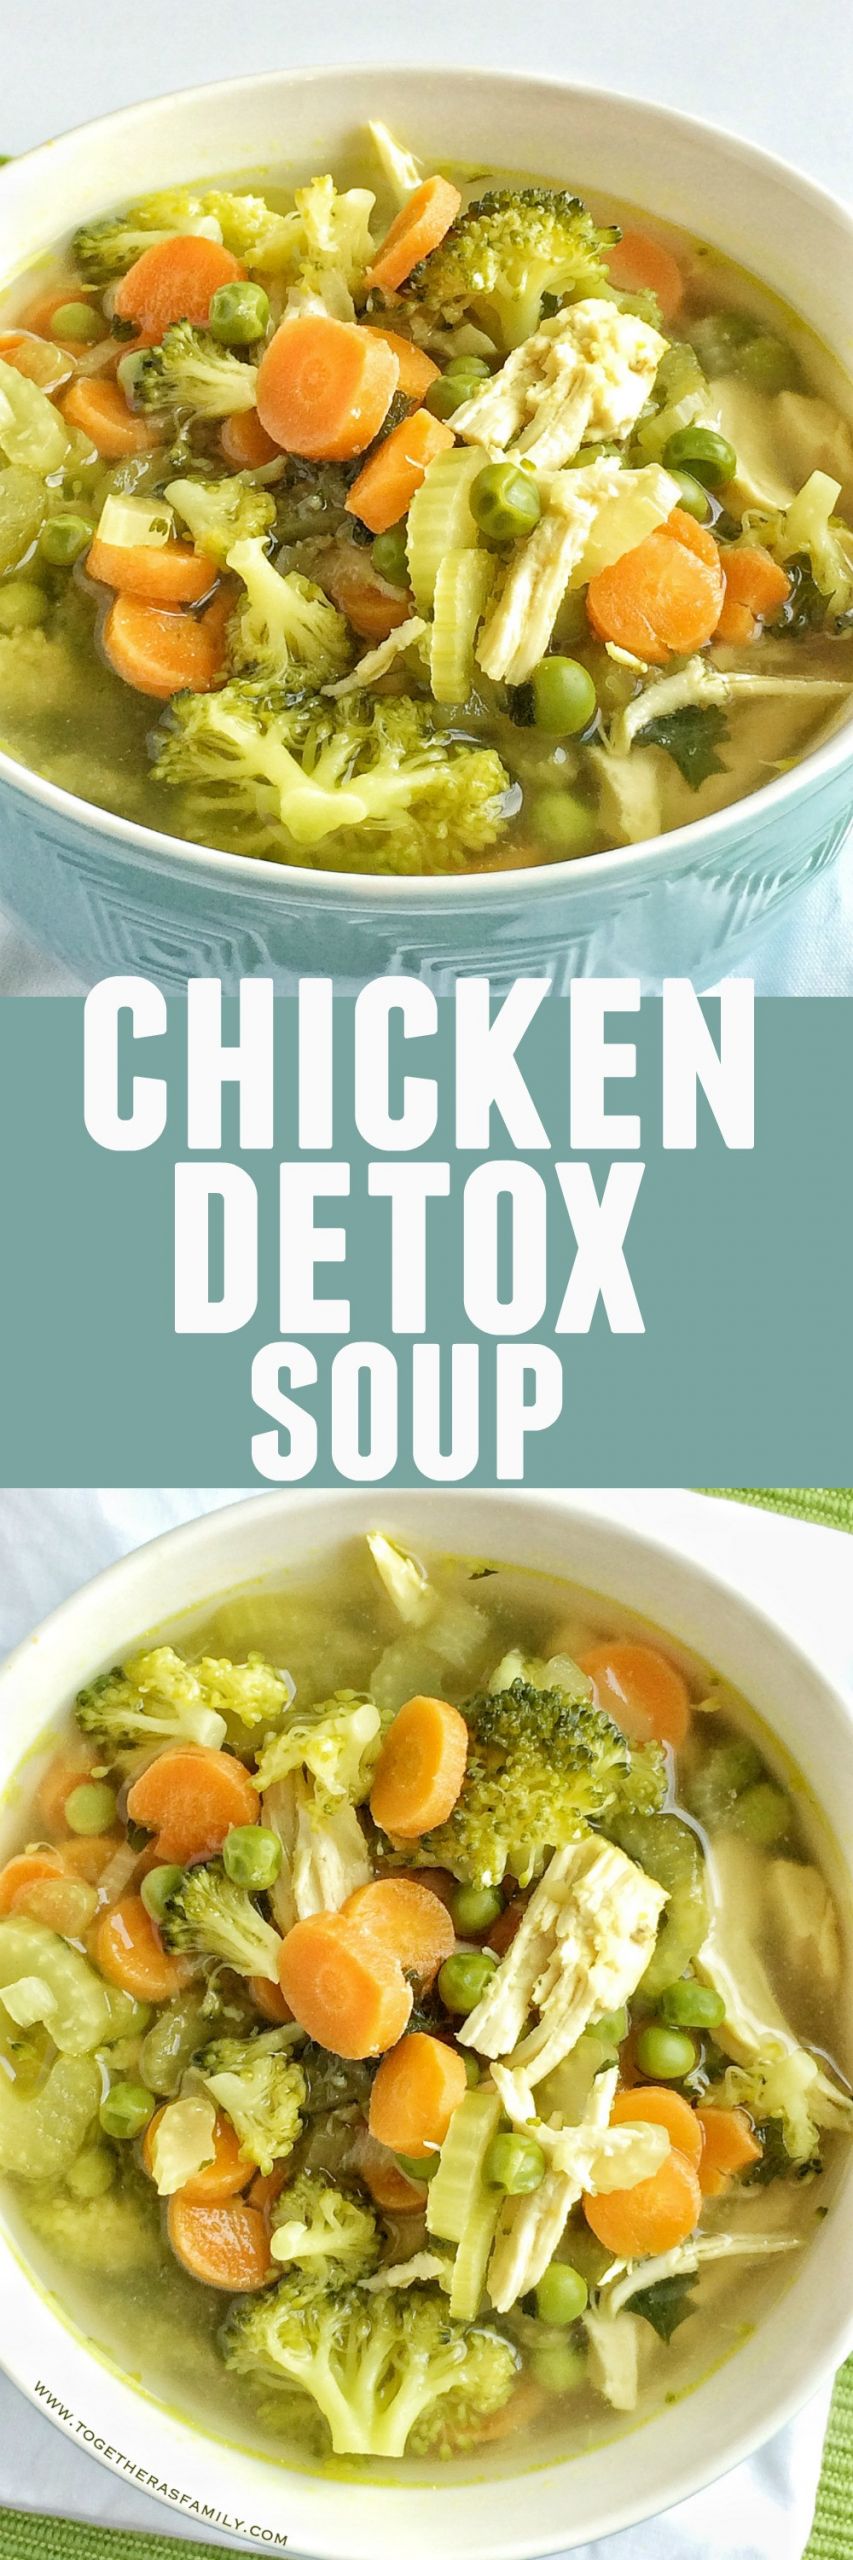 Low Calorie Chicken Dinner Recipes
 Chicken Detox Soup To her as Family